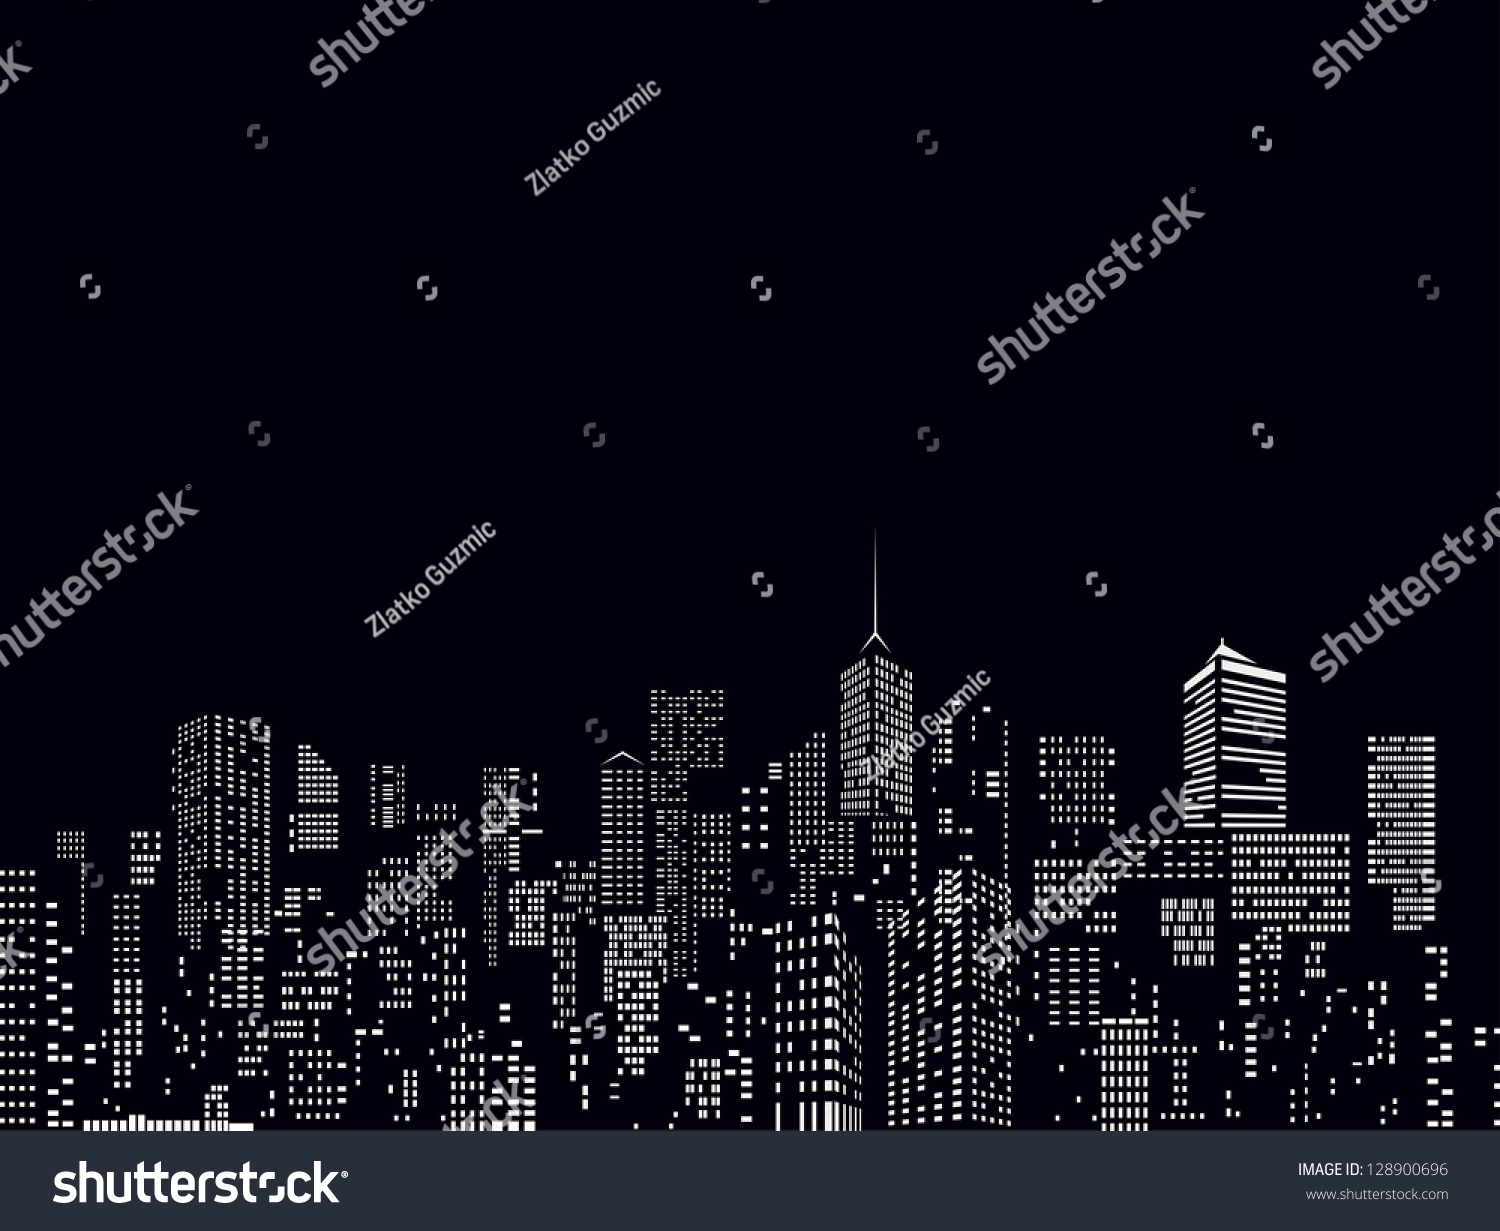 Windows On City Skylines In Black And White Stock Vector Illustration ...